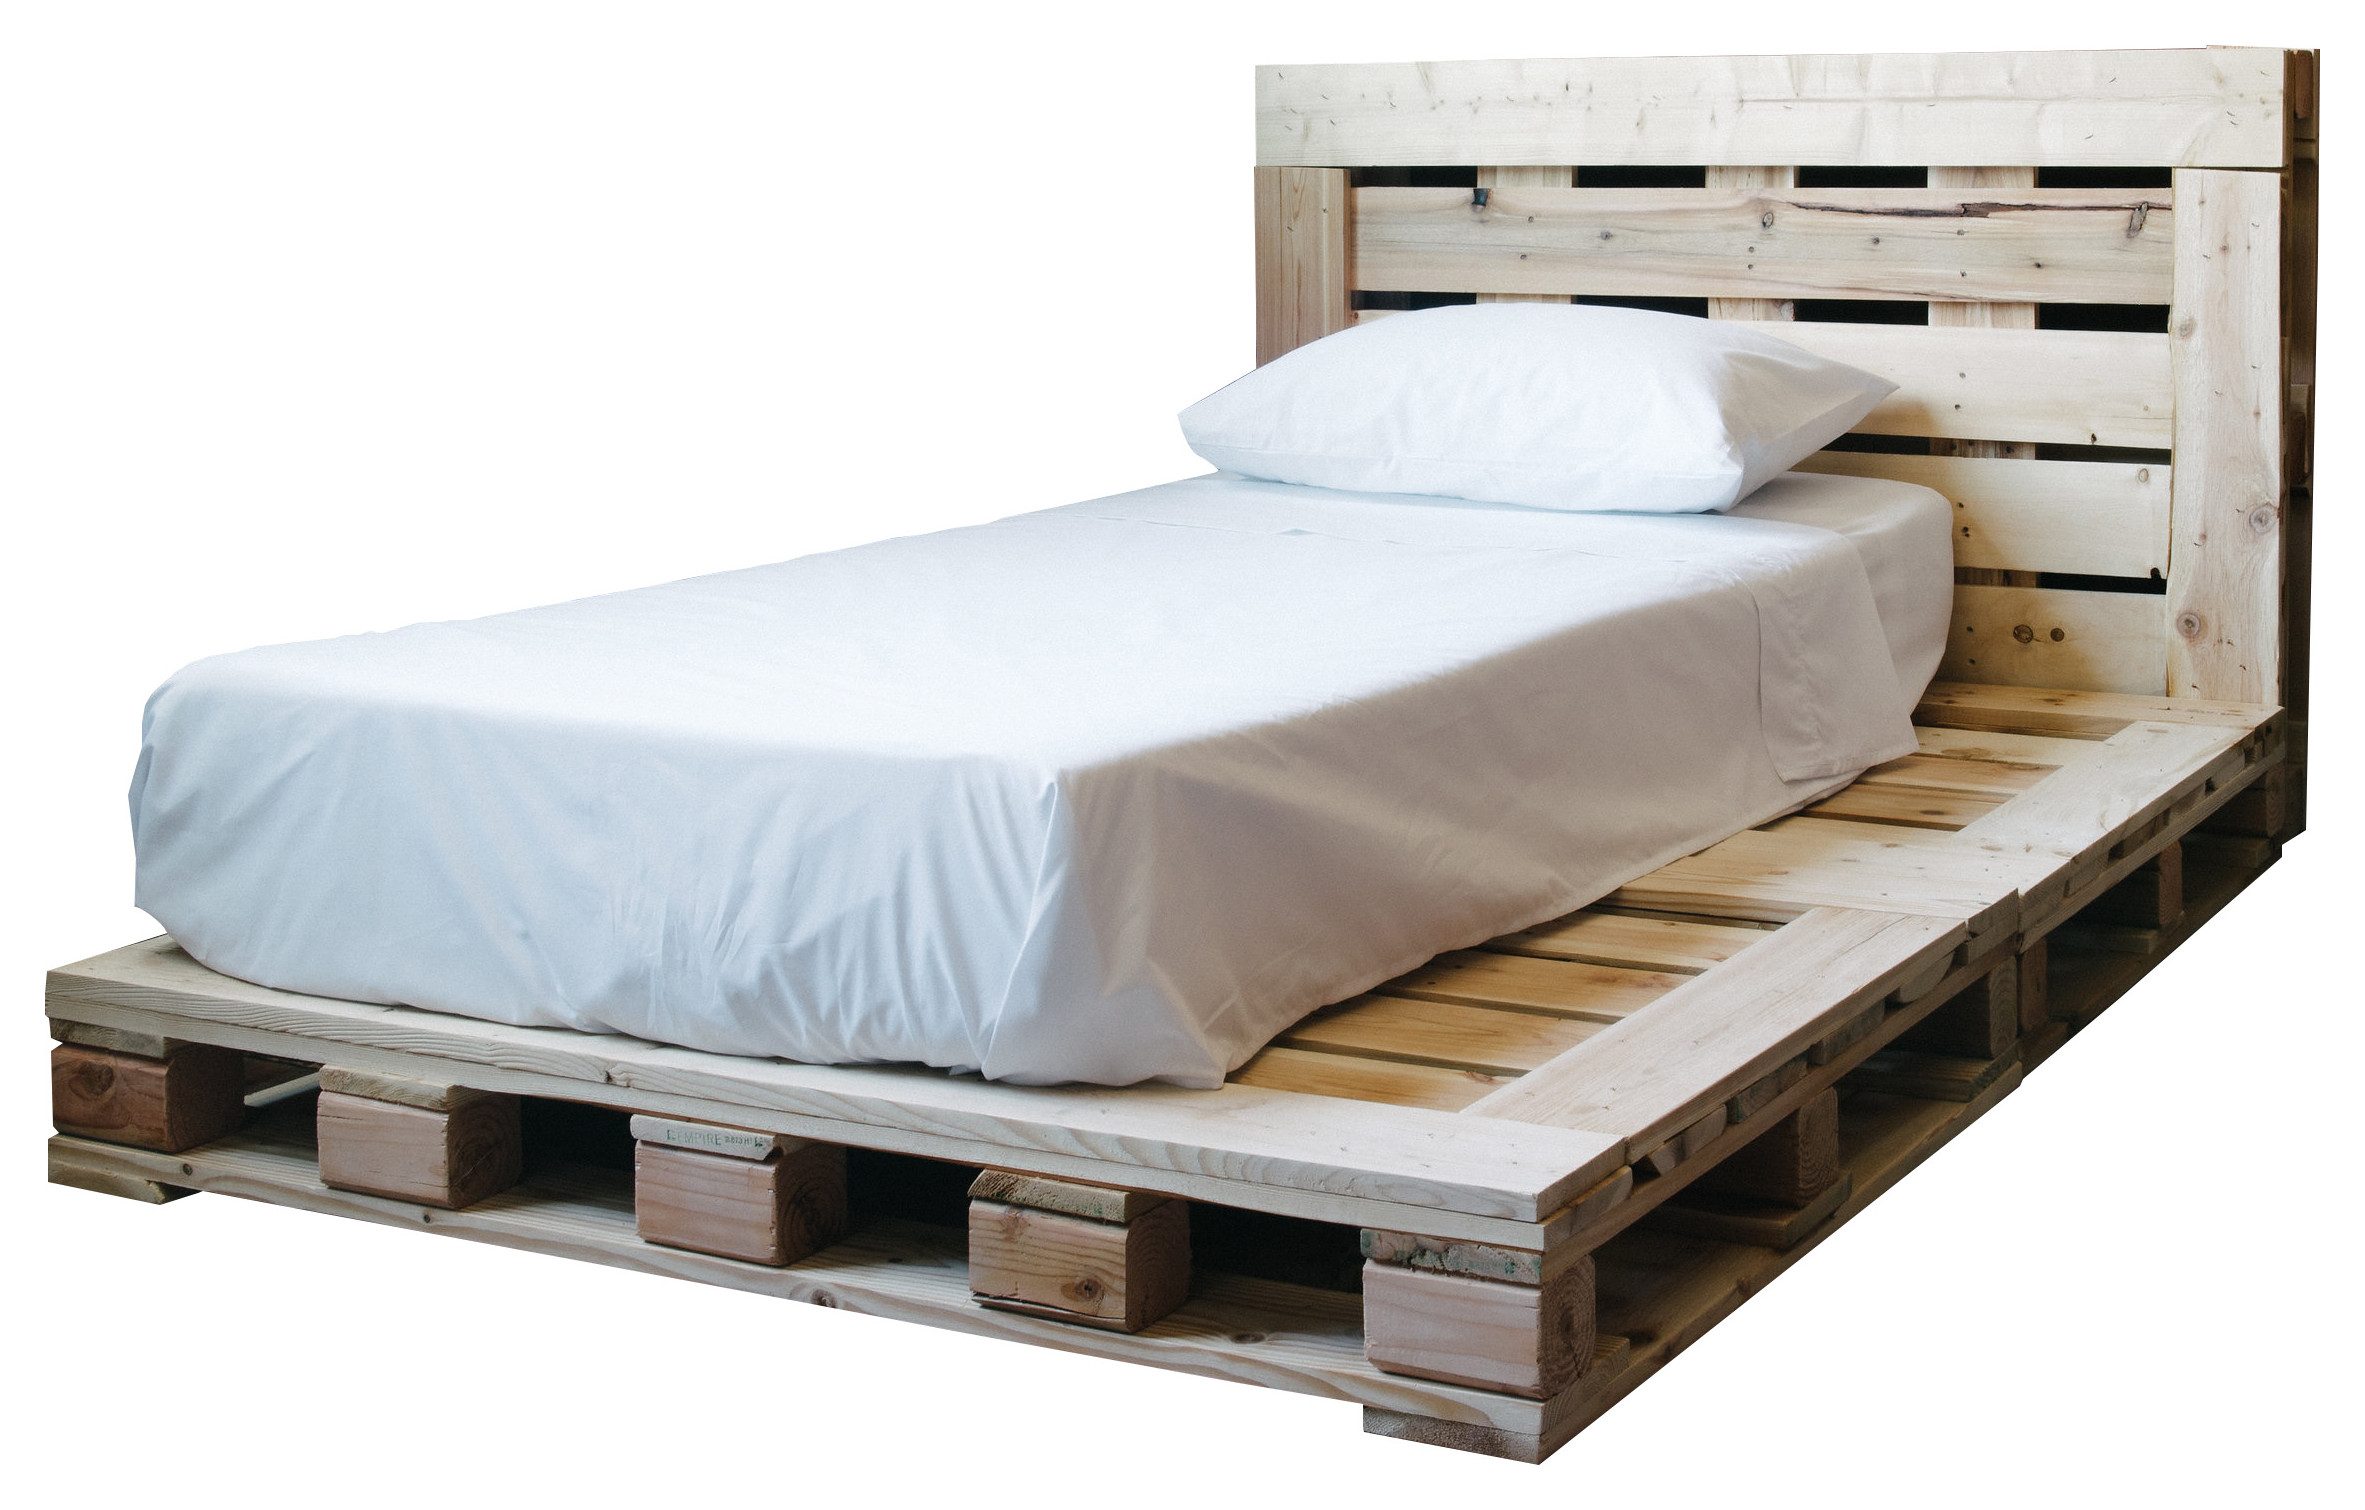 Industrial Bedroom By Pallet Beds, Twin Size Pallet Bed Frame